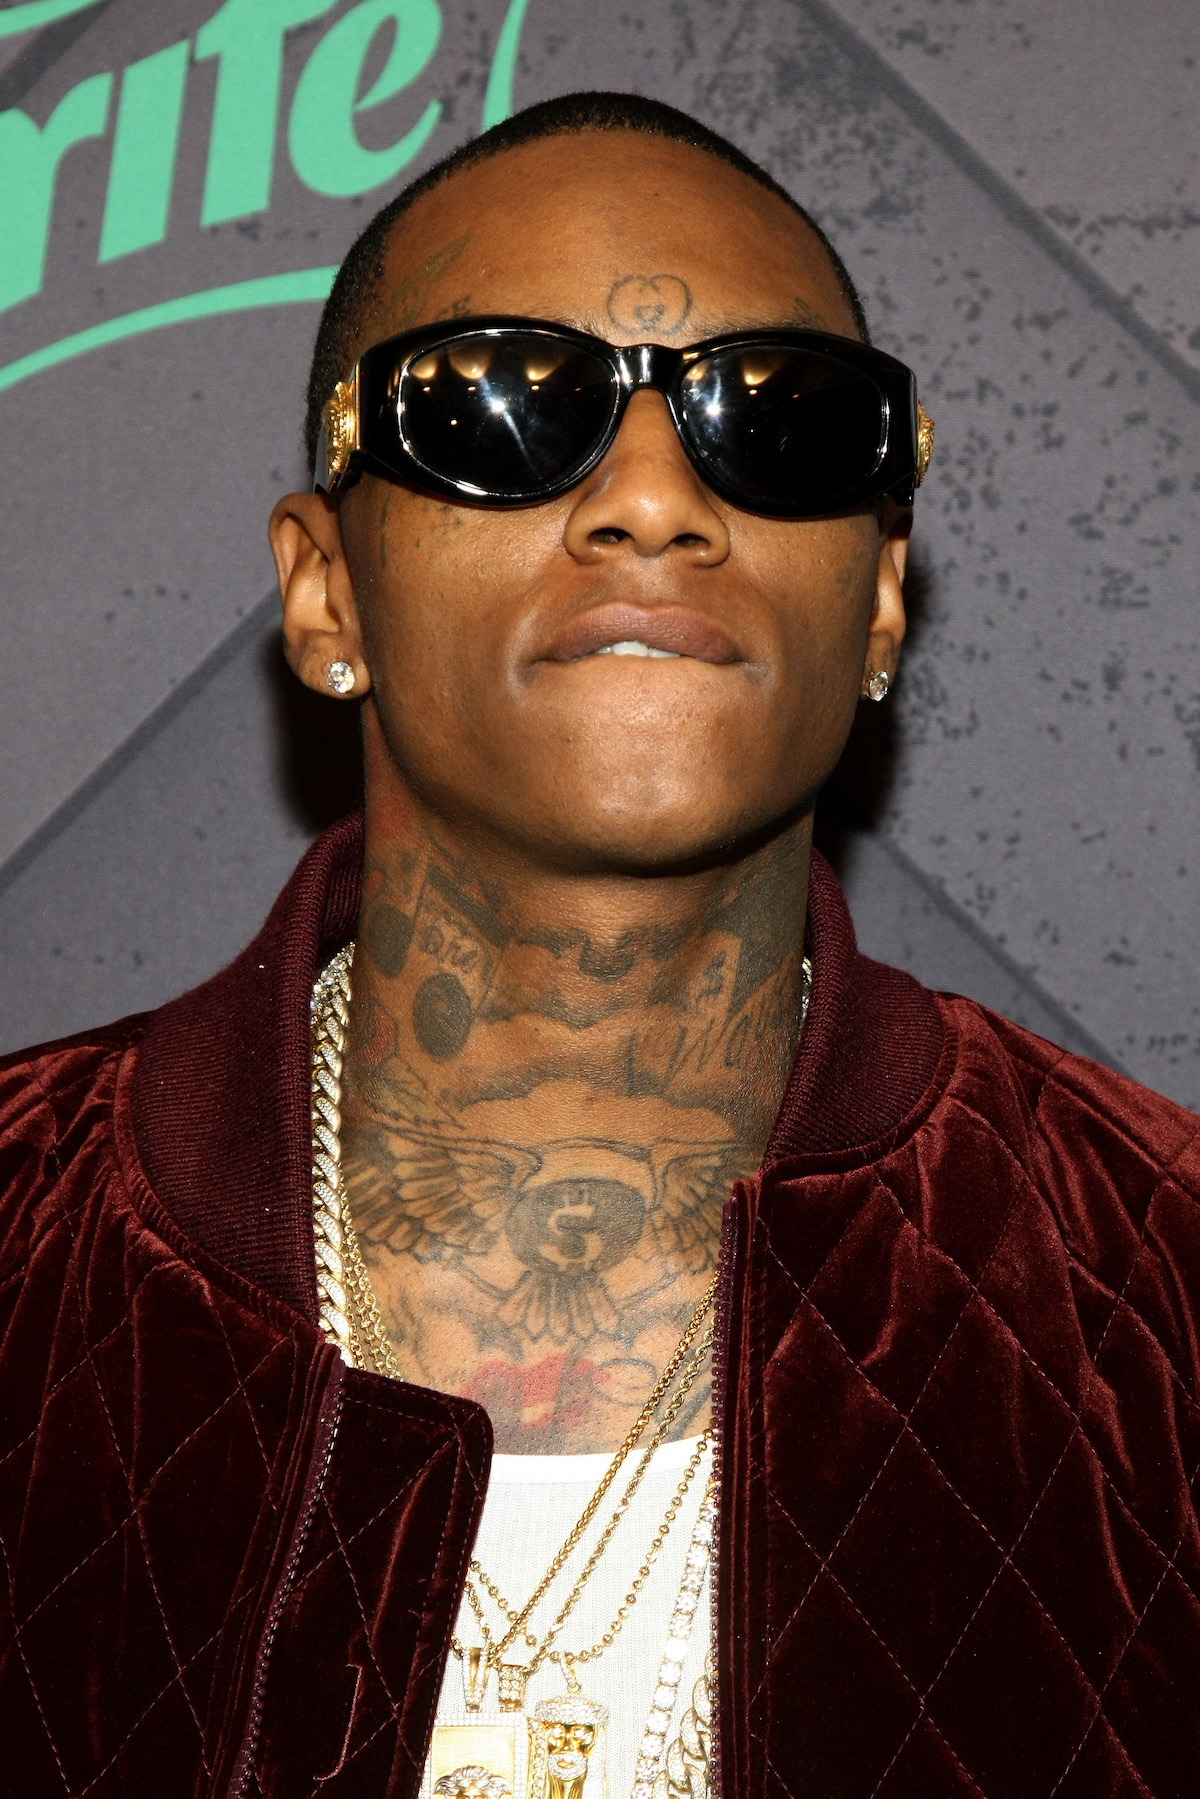 Soulja Boy attends the BET Hip Hop Awards 2015 presented by Sprite at Atlanta Civic Center on October 9, 2015 in Atlanta, Georgia | Bennett Raglin/BET/Getty Images for BET Networks